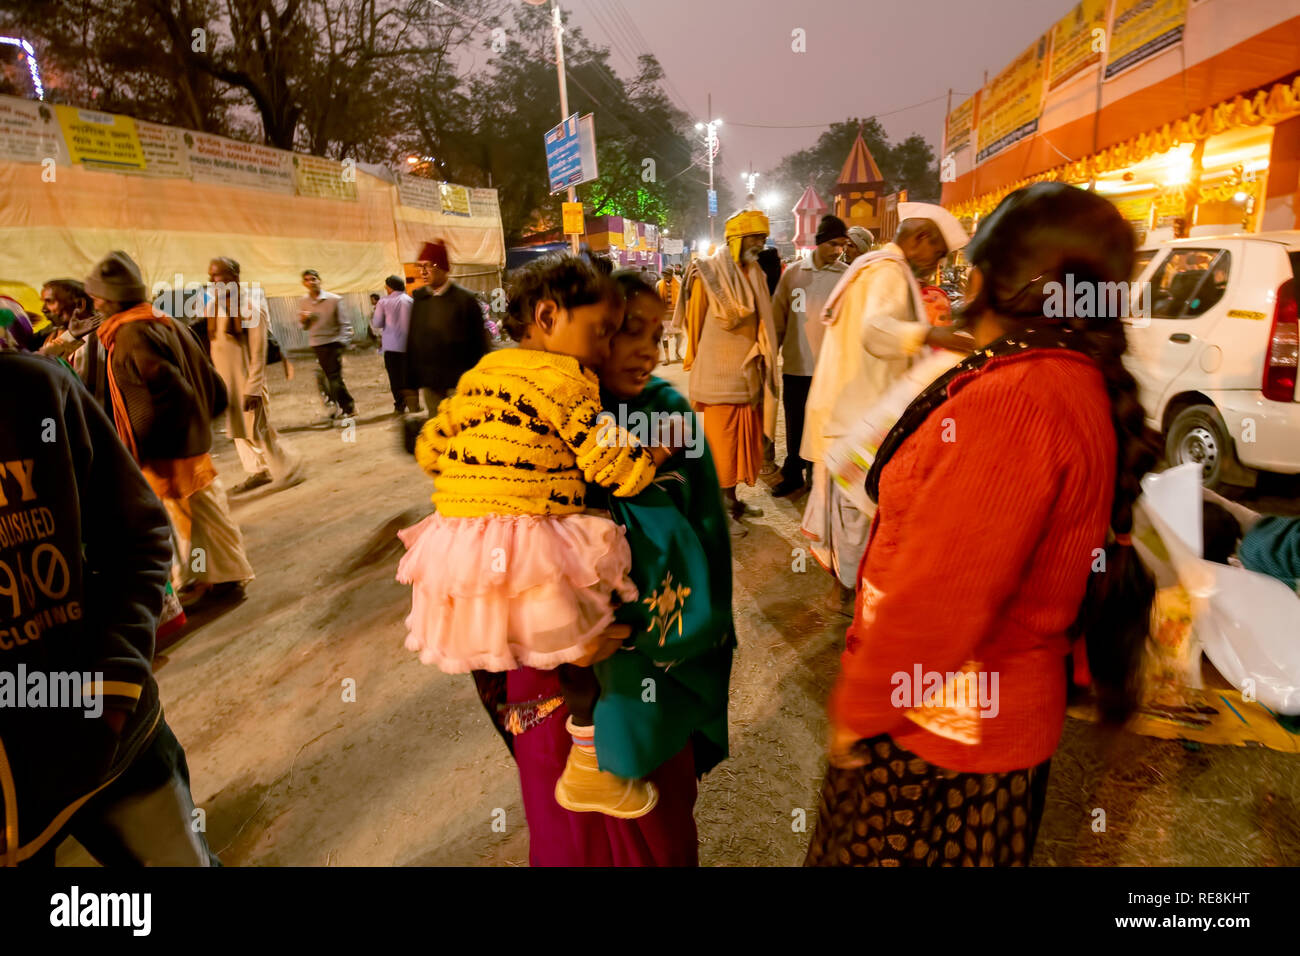 Evening,scene,at Gangasagar ,Pilgrim,transit area,mother,baby daughter,an anxious moment , another female,in red sweater,Kolkata,India. Stock Photo